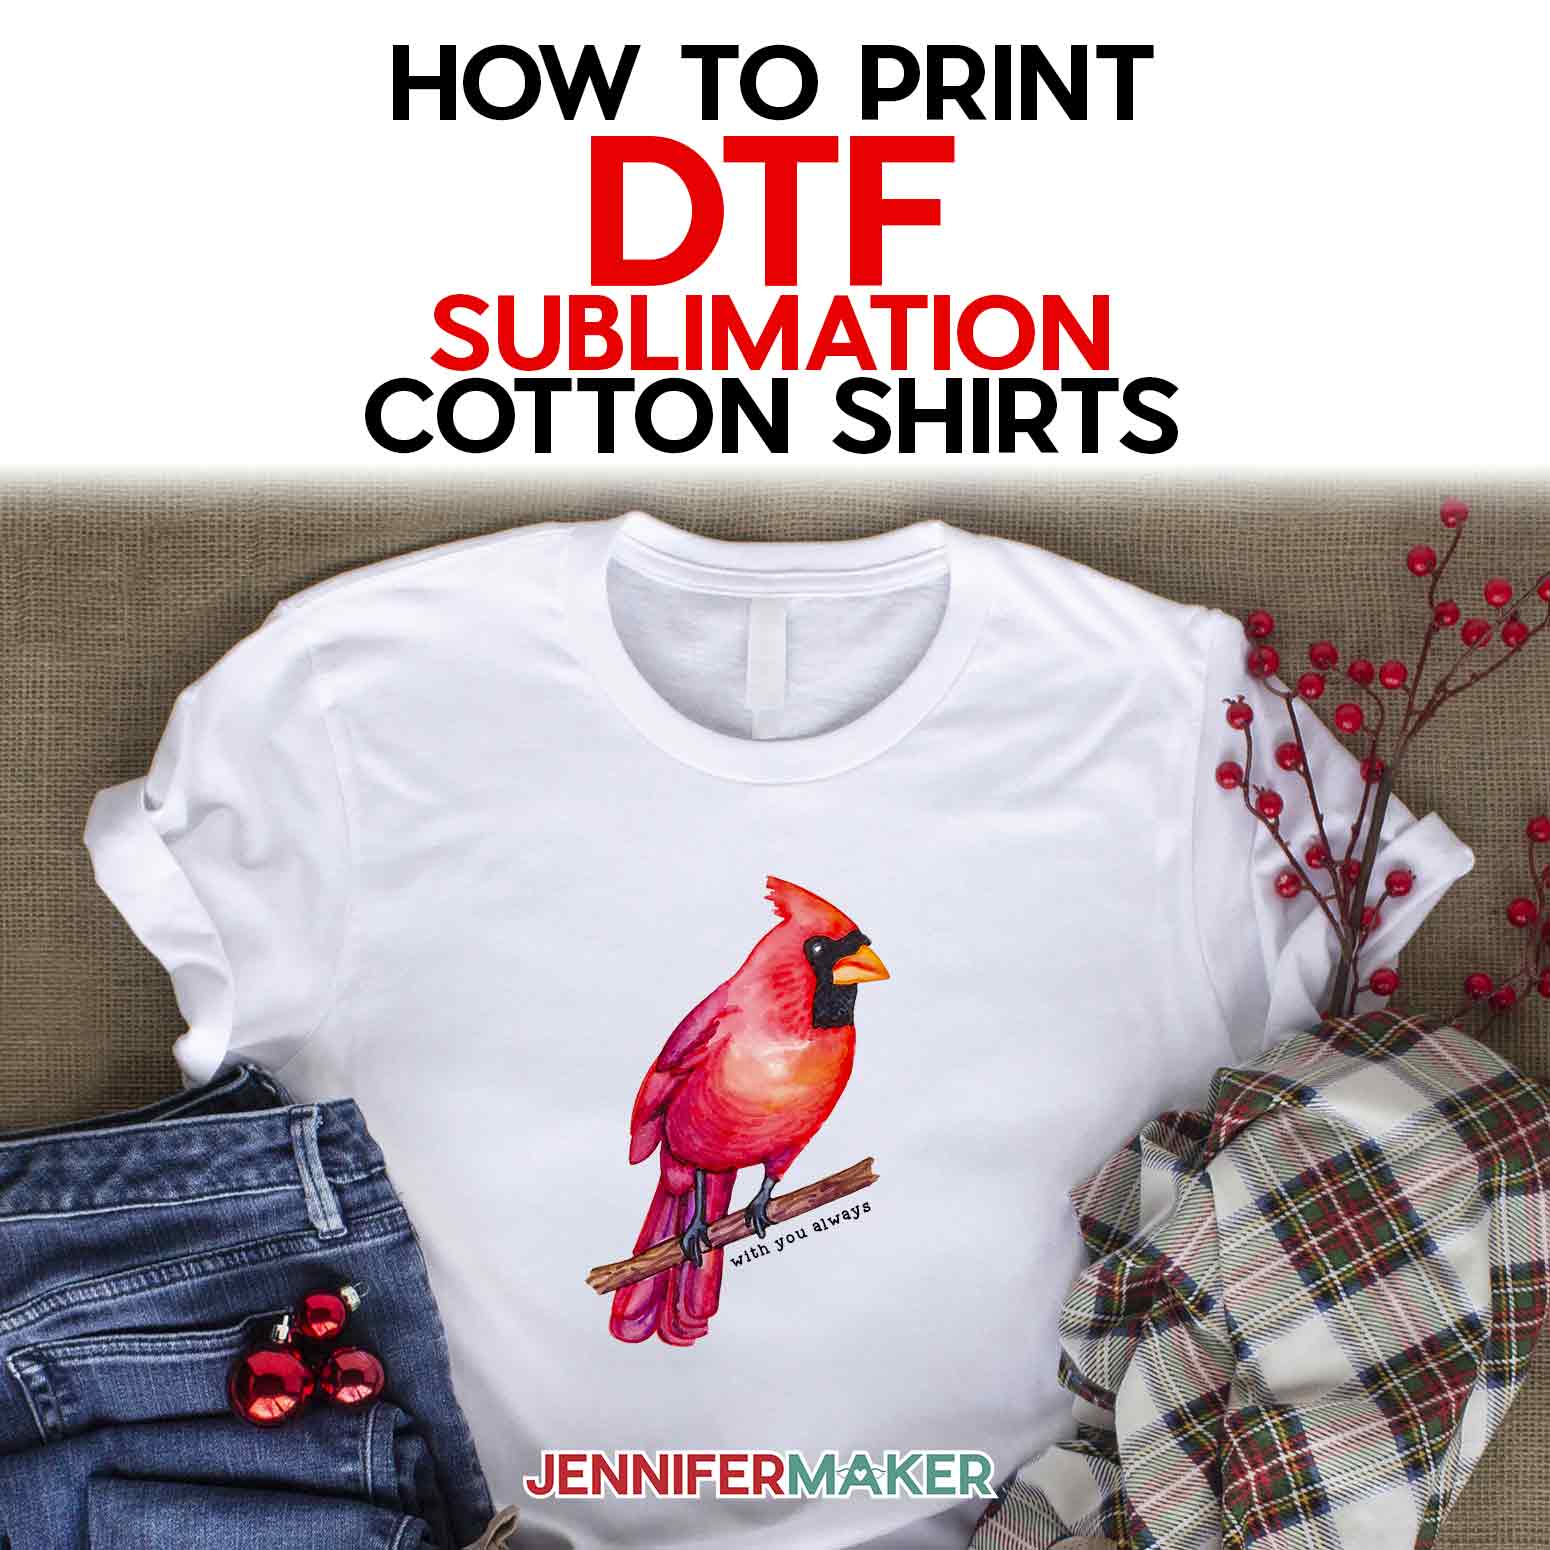 DTF T-Shirt Printing at Home on COTTON: Sublimation Print Hack